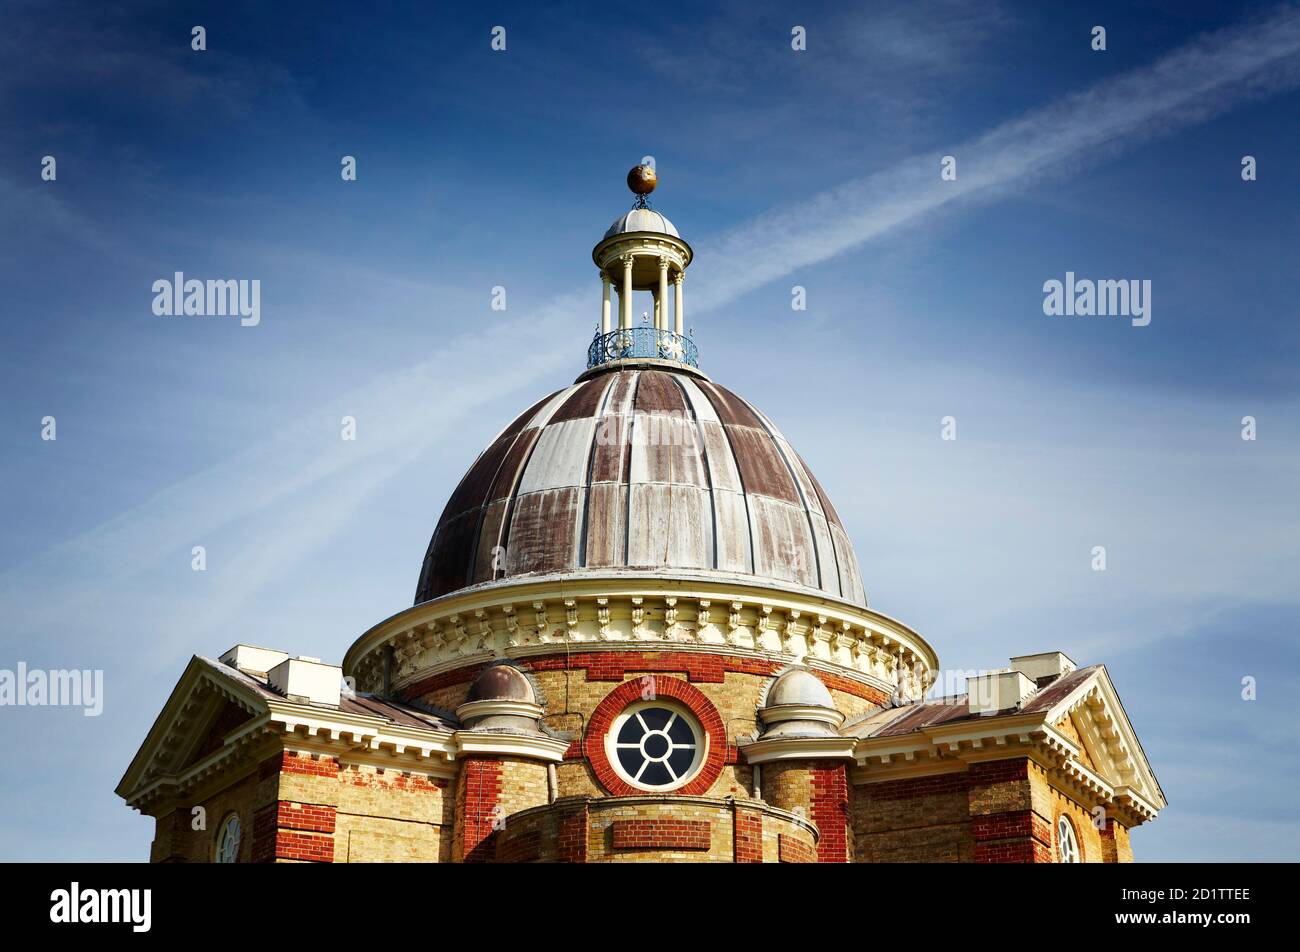 WREST PARK HOUSE AND GARDENS, Silsoe, Bedfordshire. Detailed view of the domed Thomas Archer Pavilion built in a Baroque design in 1709-11. Stock Photo